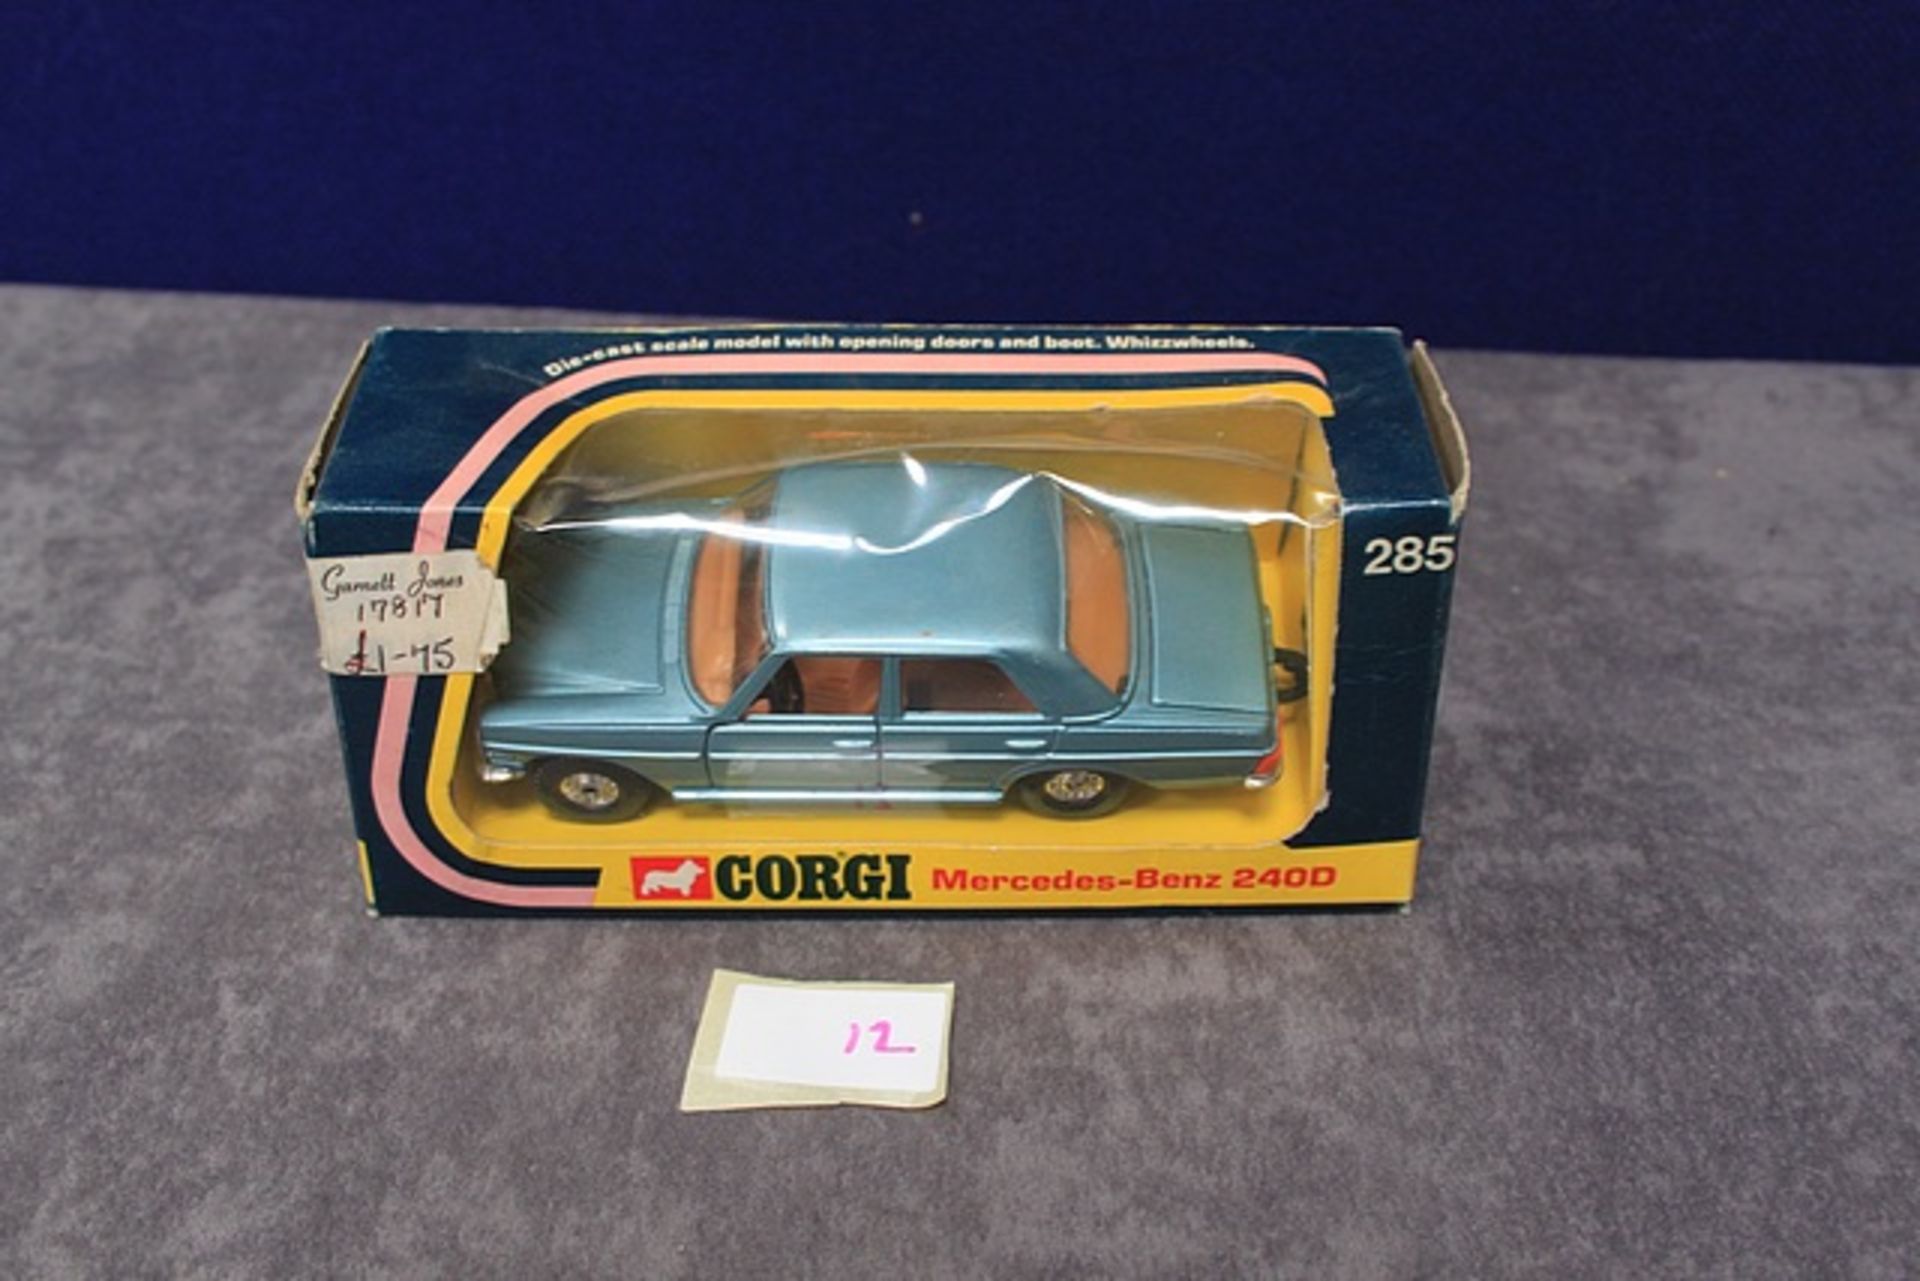 Corgi Diecast Number 285 Mercedes-Benz 240D With Very Good Box - Image 3 of 3